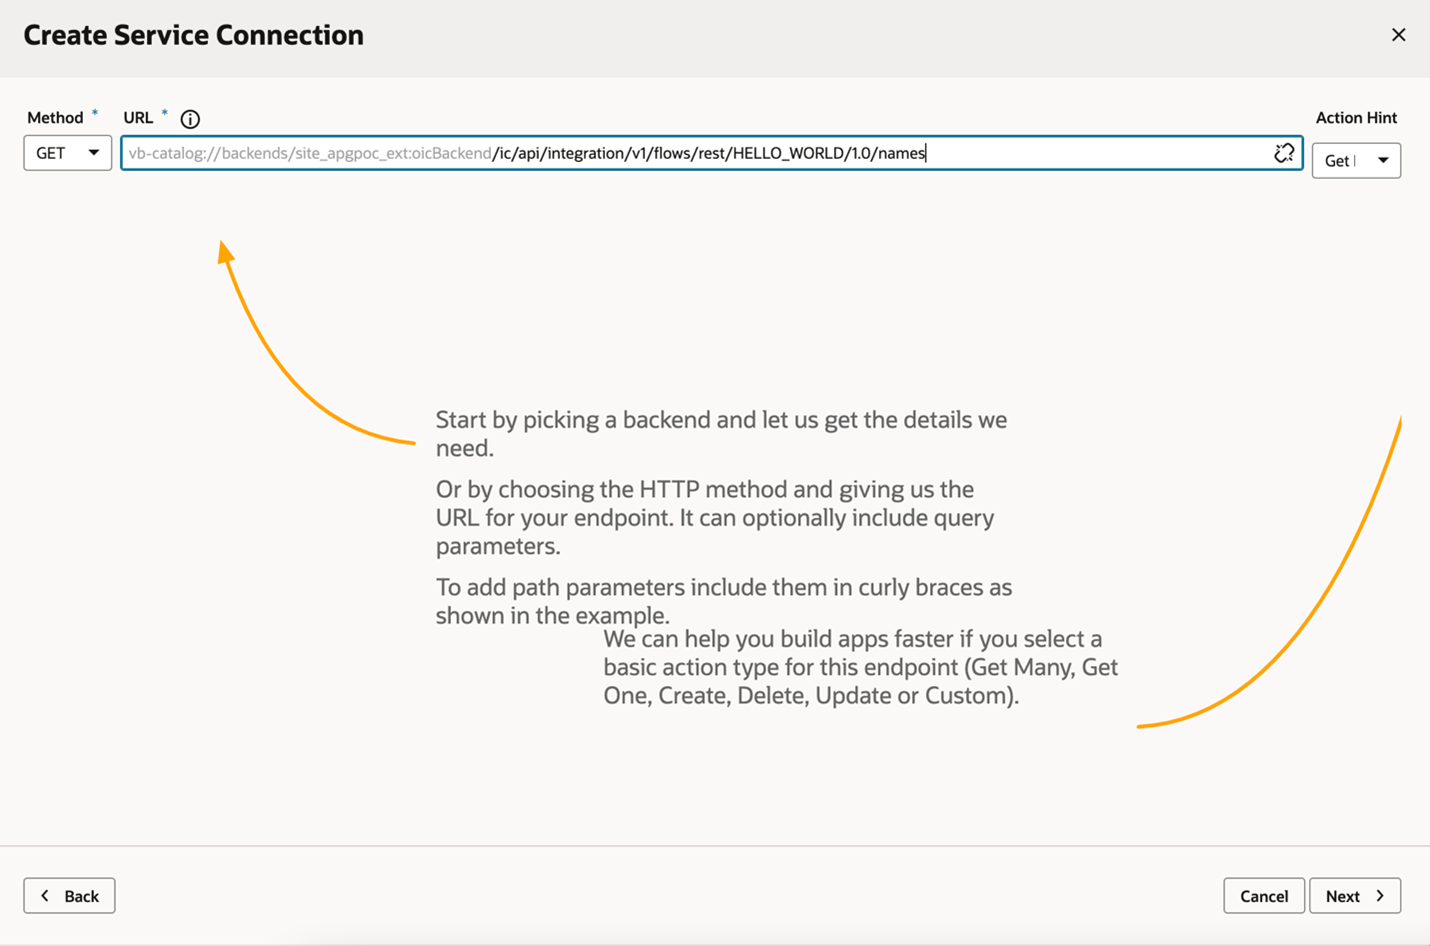 The Create Service Connection screen used to create a service connection by using its endpoint, which you add to the URL field, and select a Method (GET) and an Action Hint (Get Many)